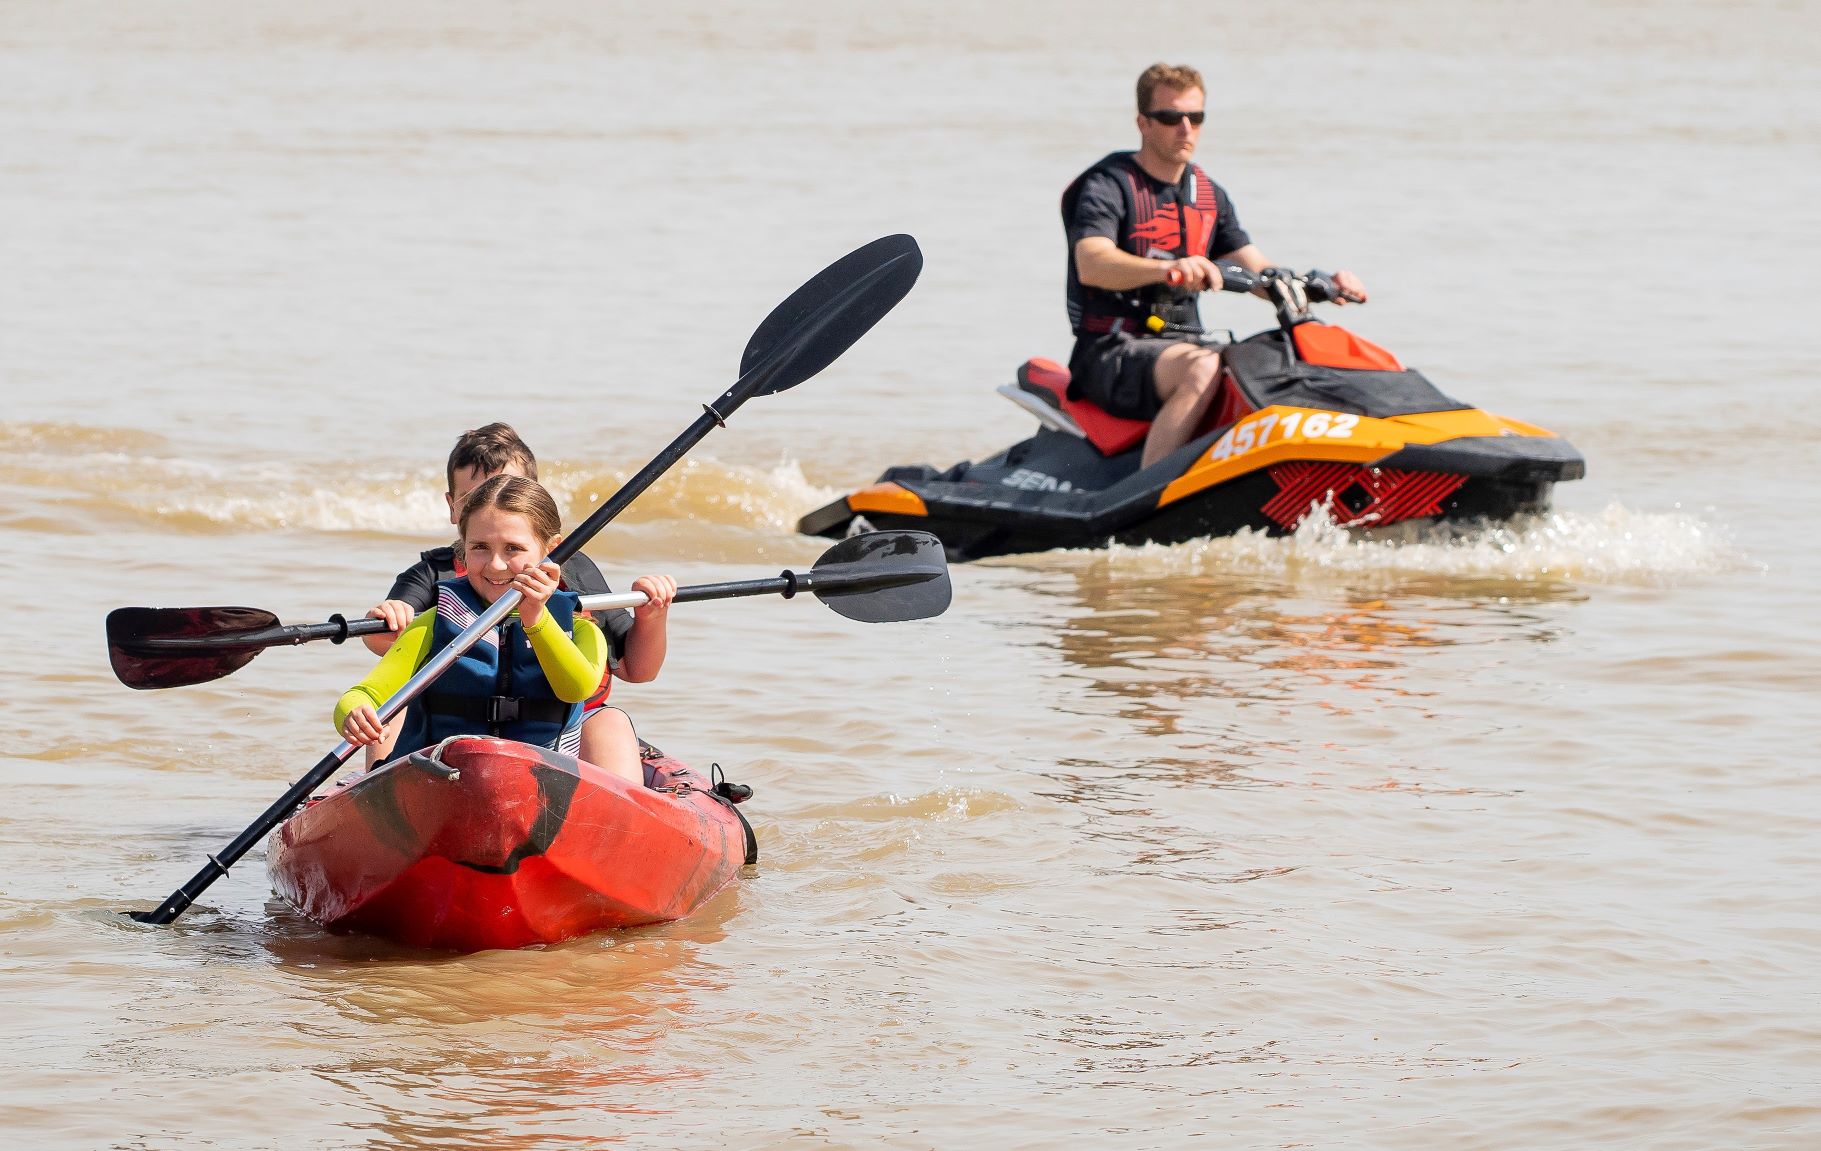 Children on a kayak with a jetski doing 4 knots in the background